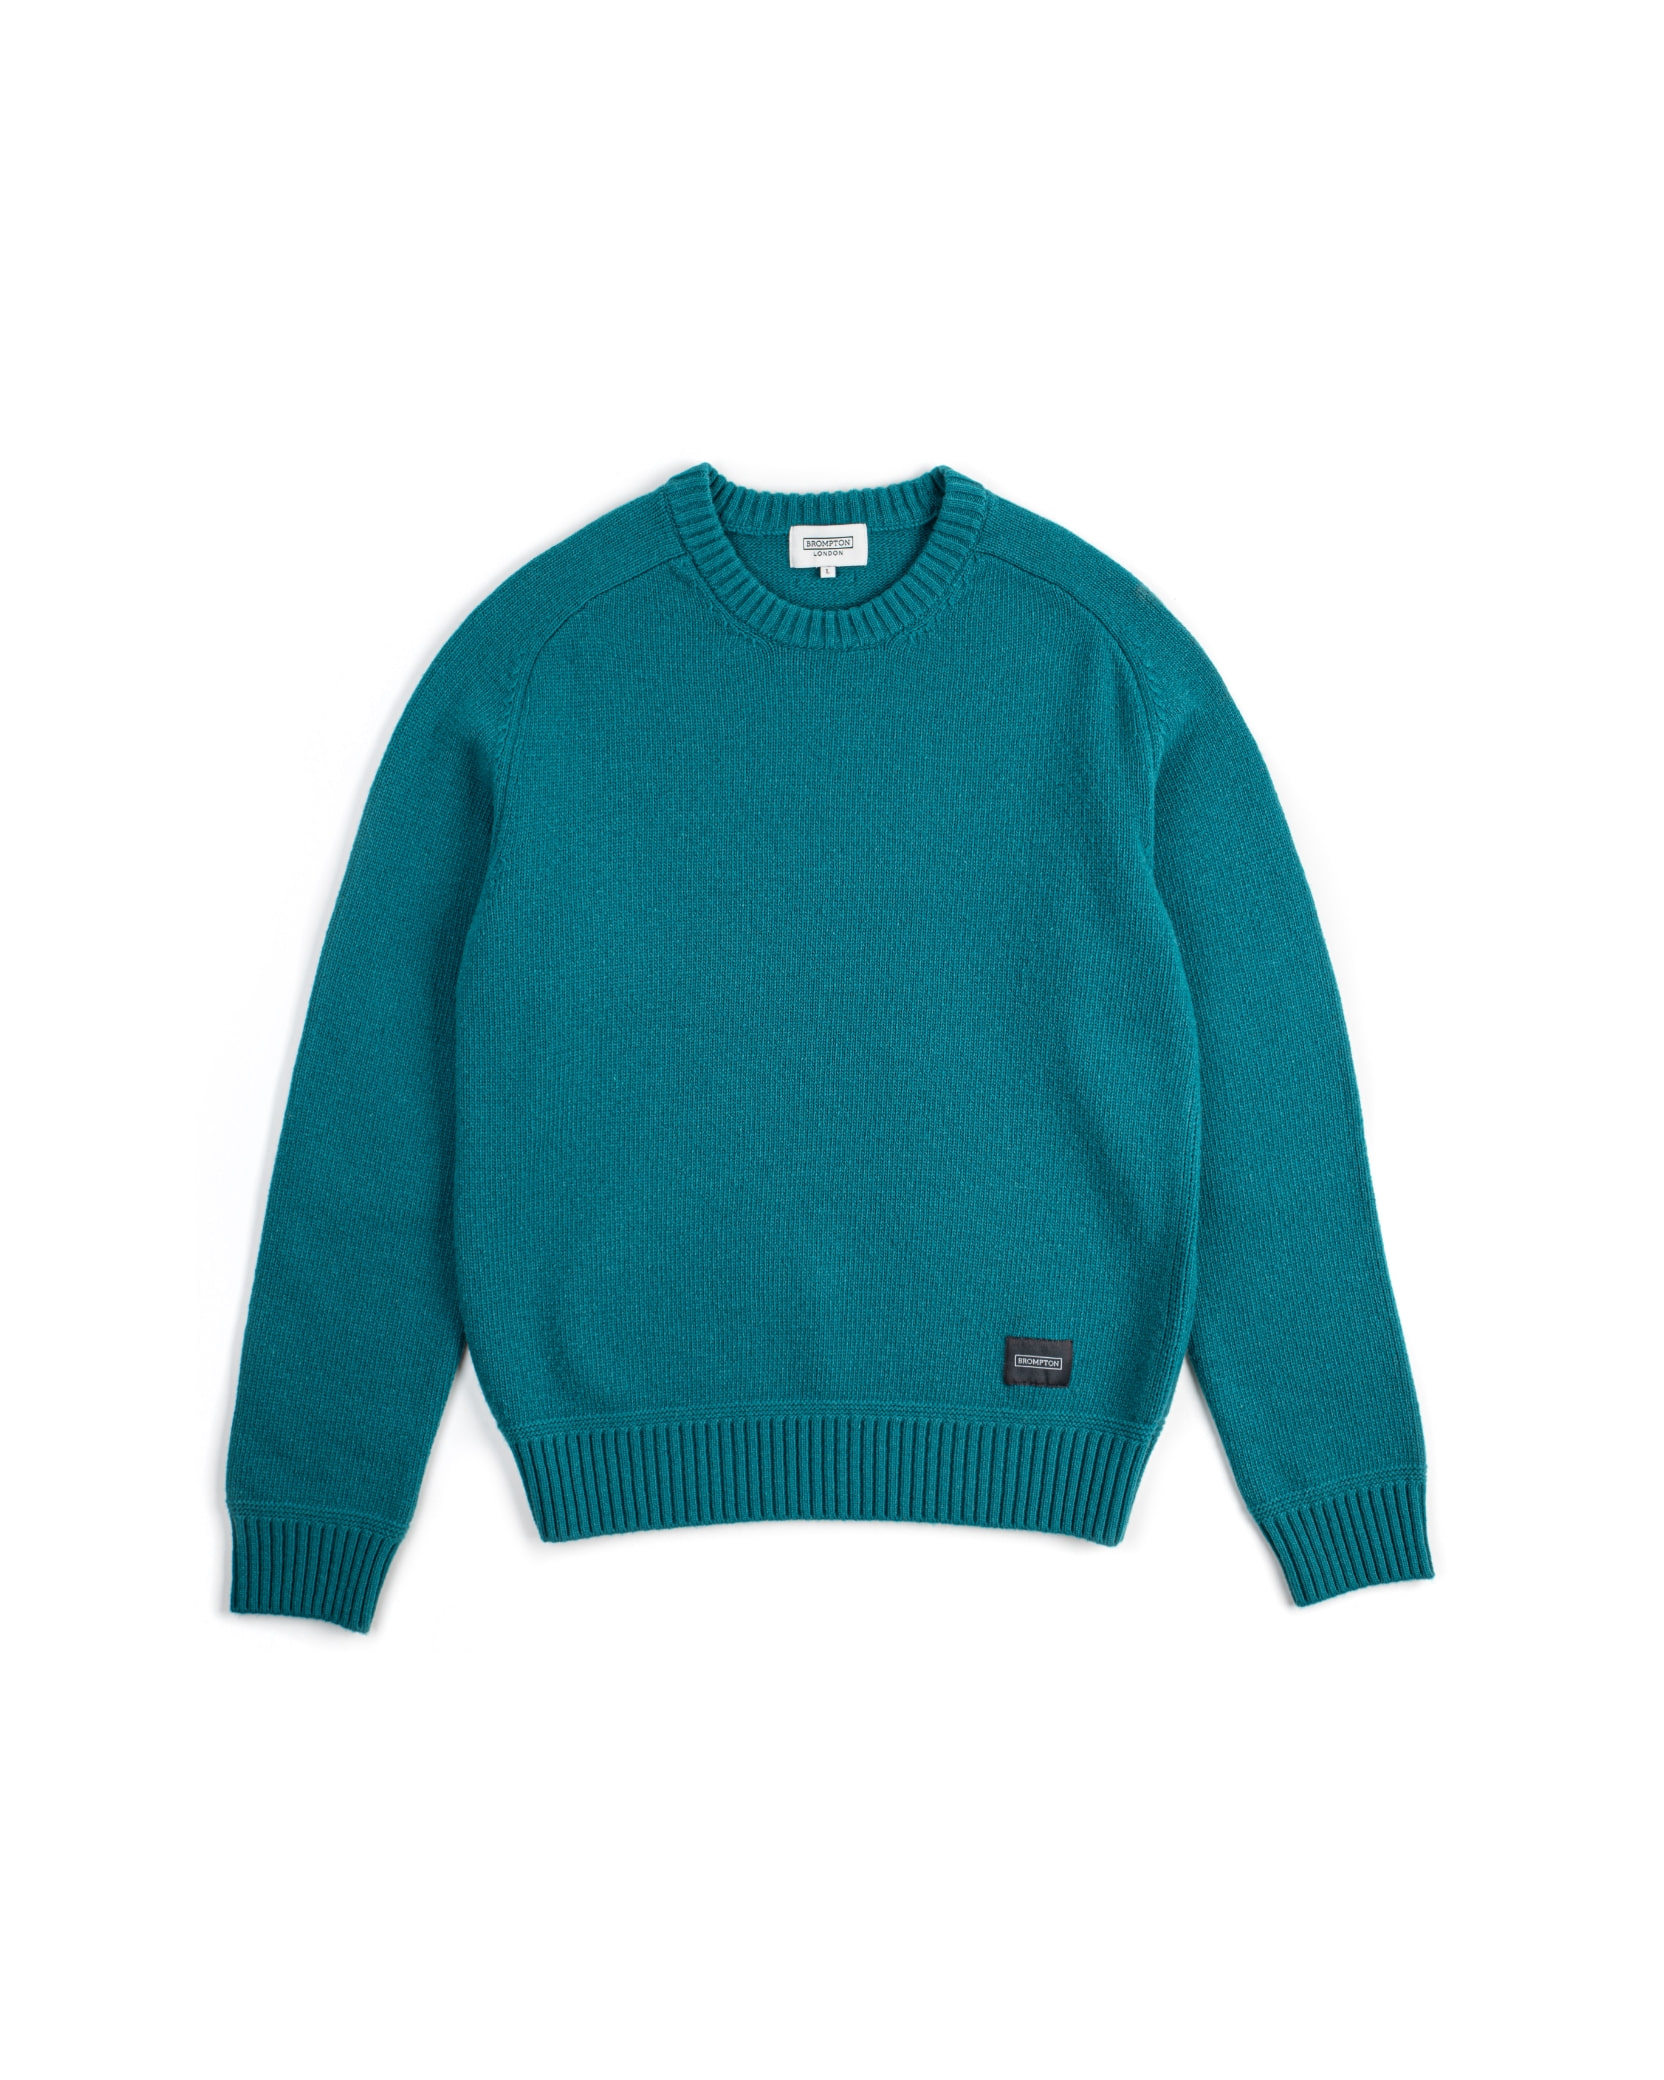 WOOL BLENDED ELBOW PATCH ROUND SWEATER - T/BLUE